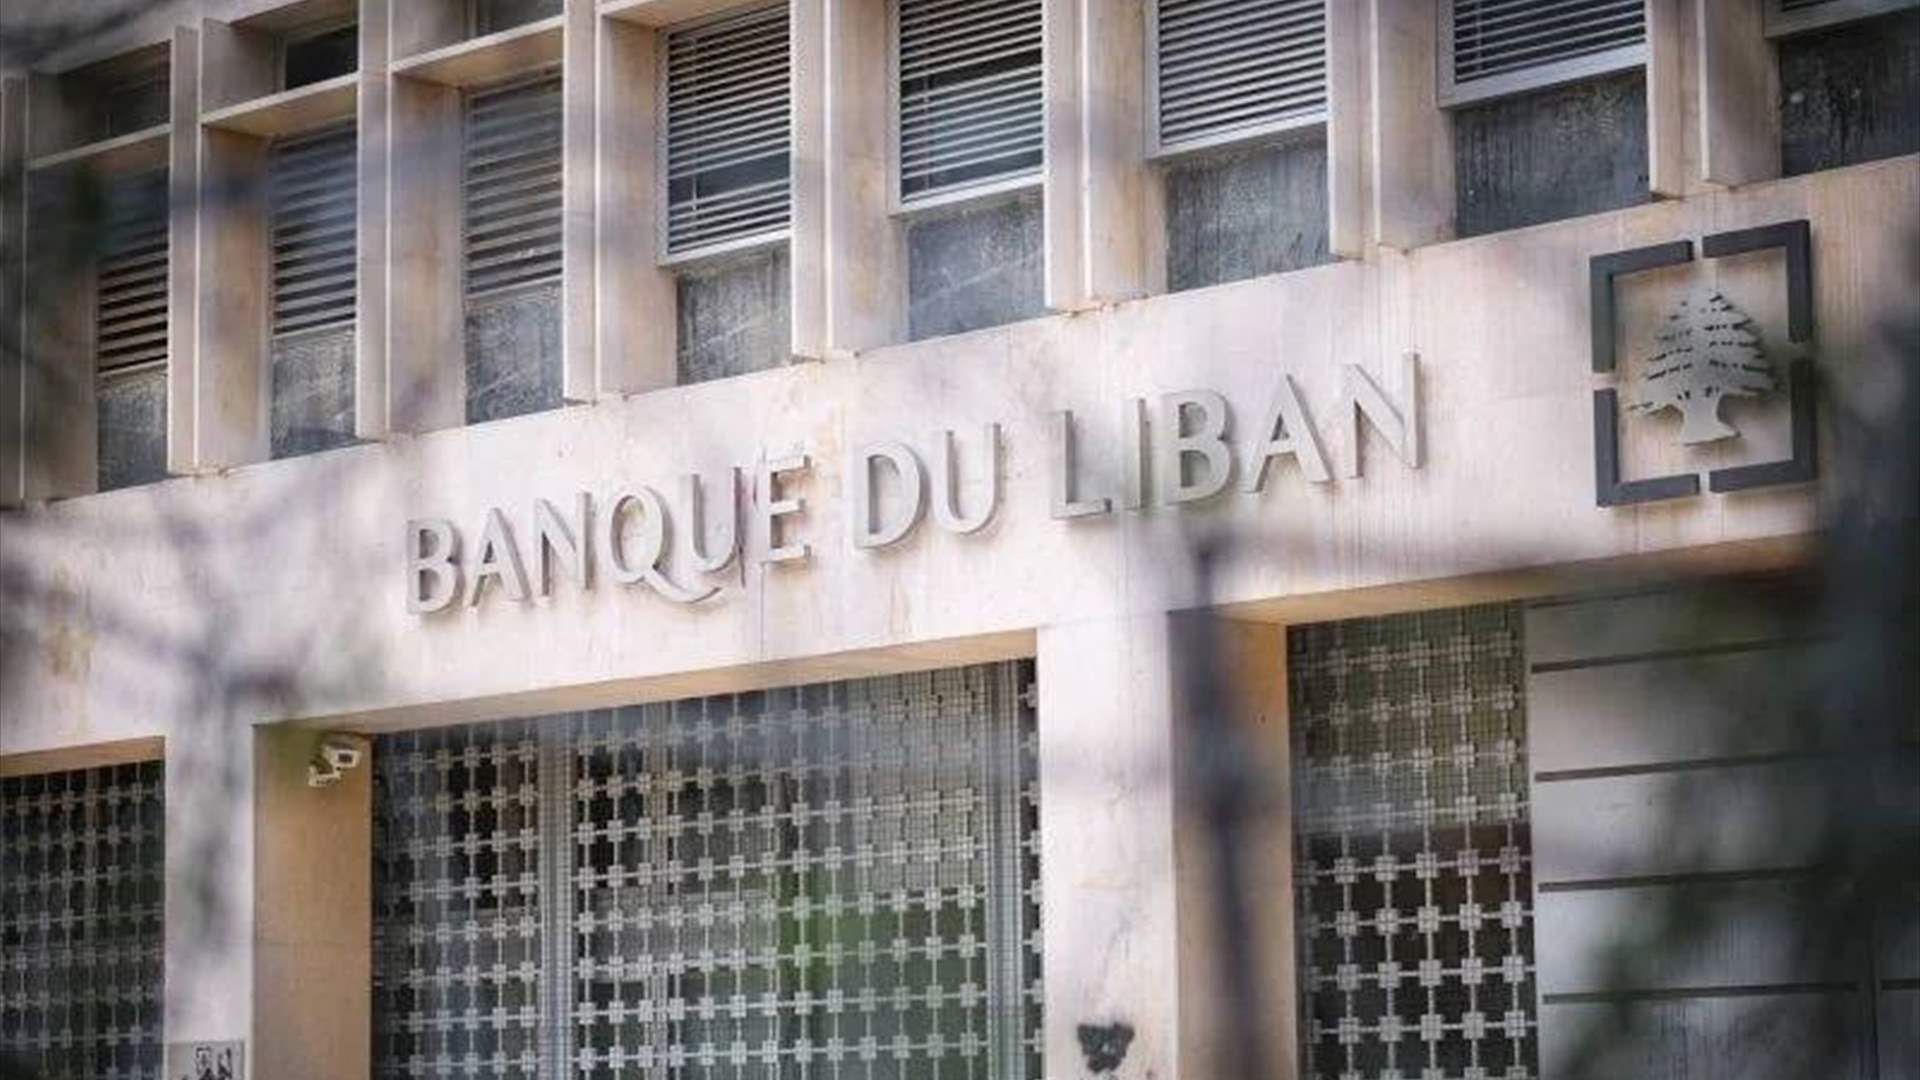 Lebanon&#39;s Central Bank deputies: A closer look at their actions and motivations